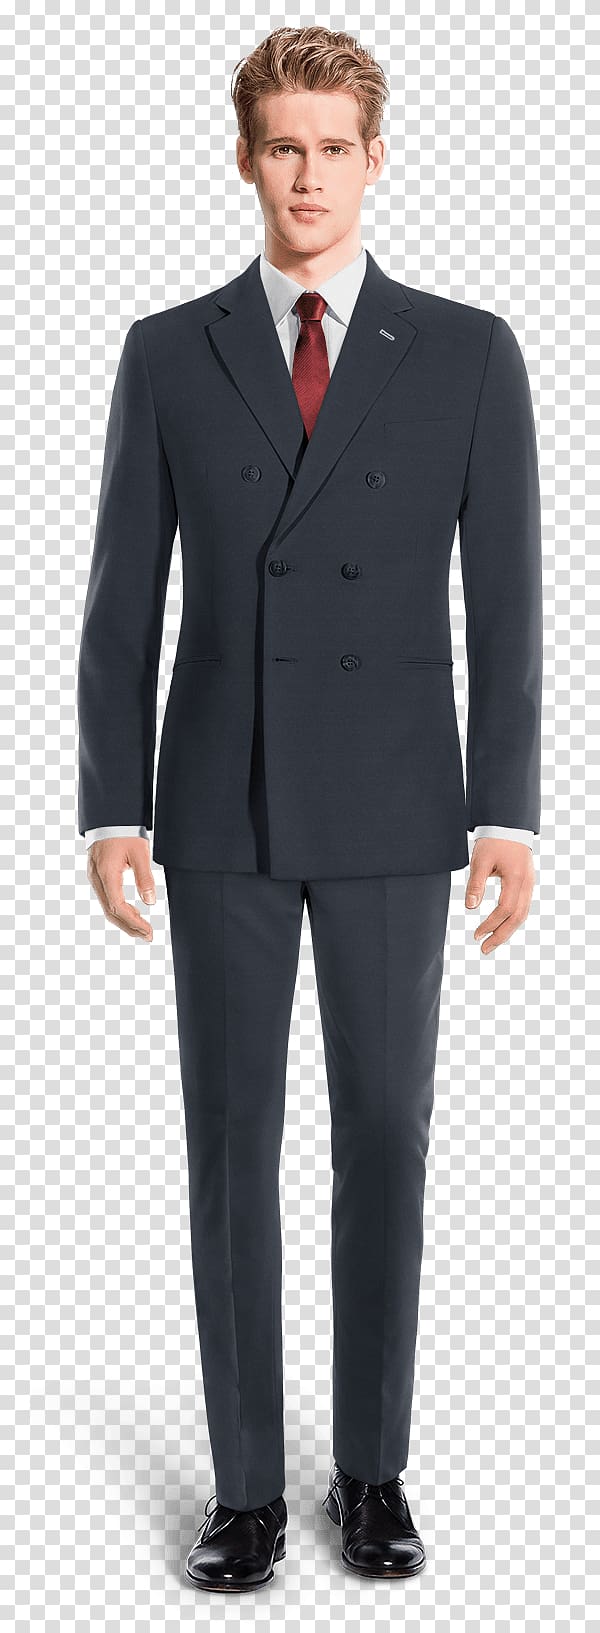 Suit Waistcoat Tuxedo Navy blue Single-breasted, suit transparent background PNG clipart